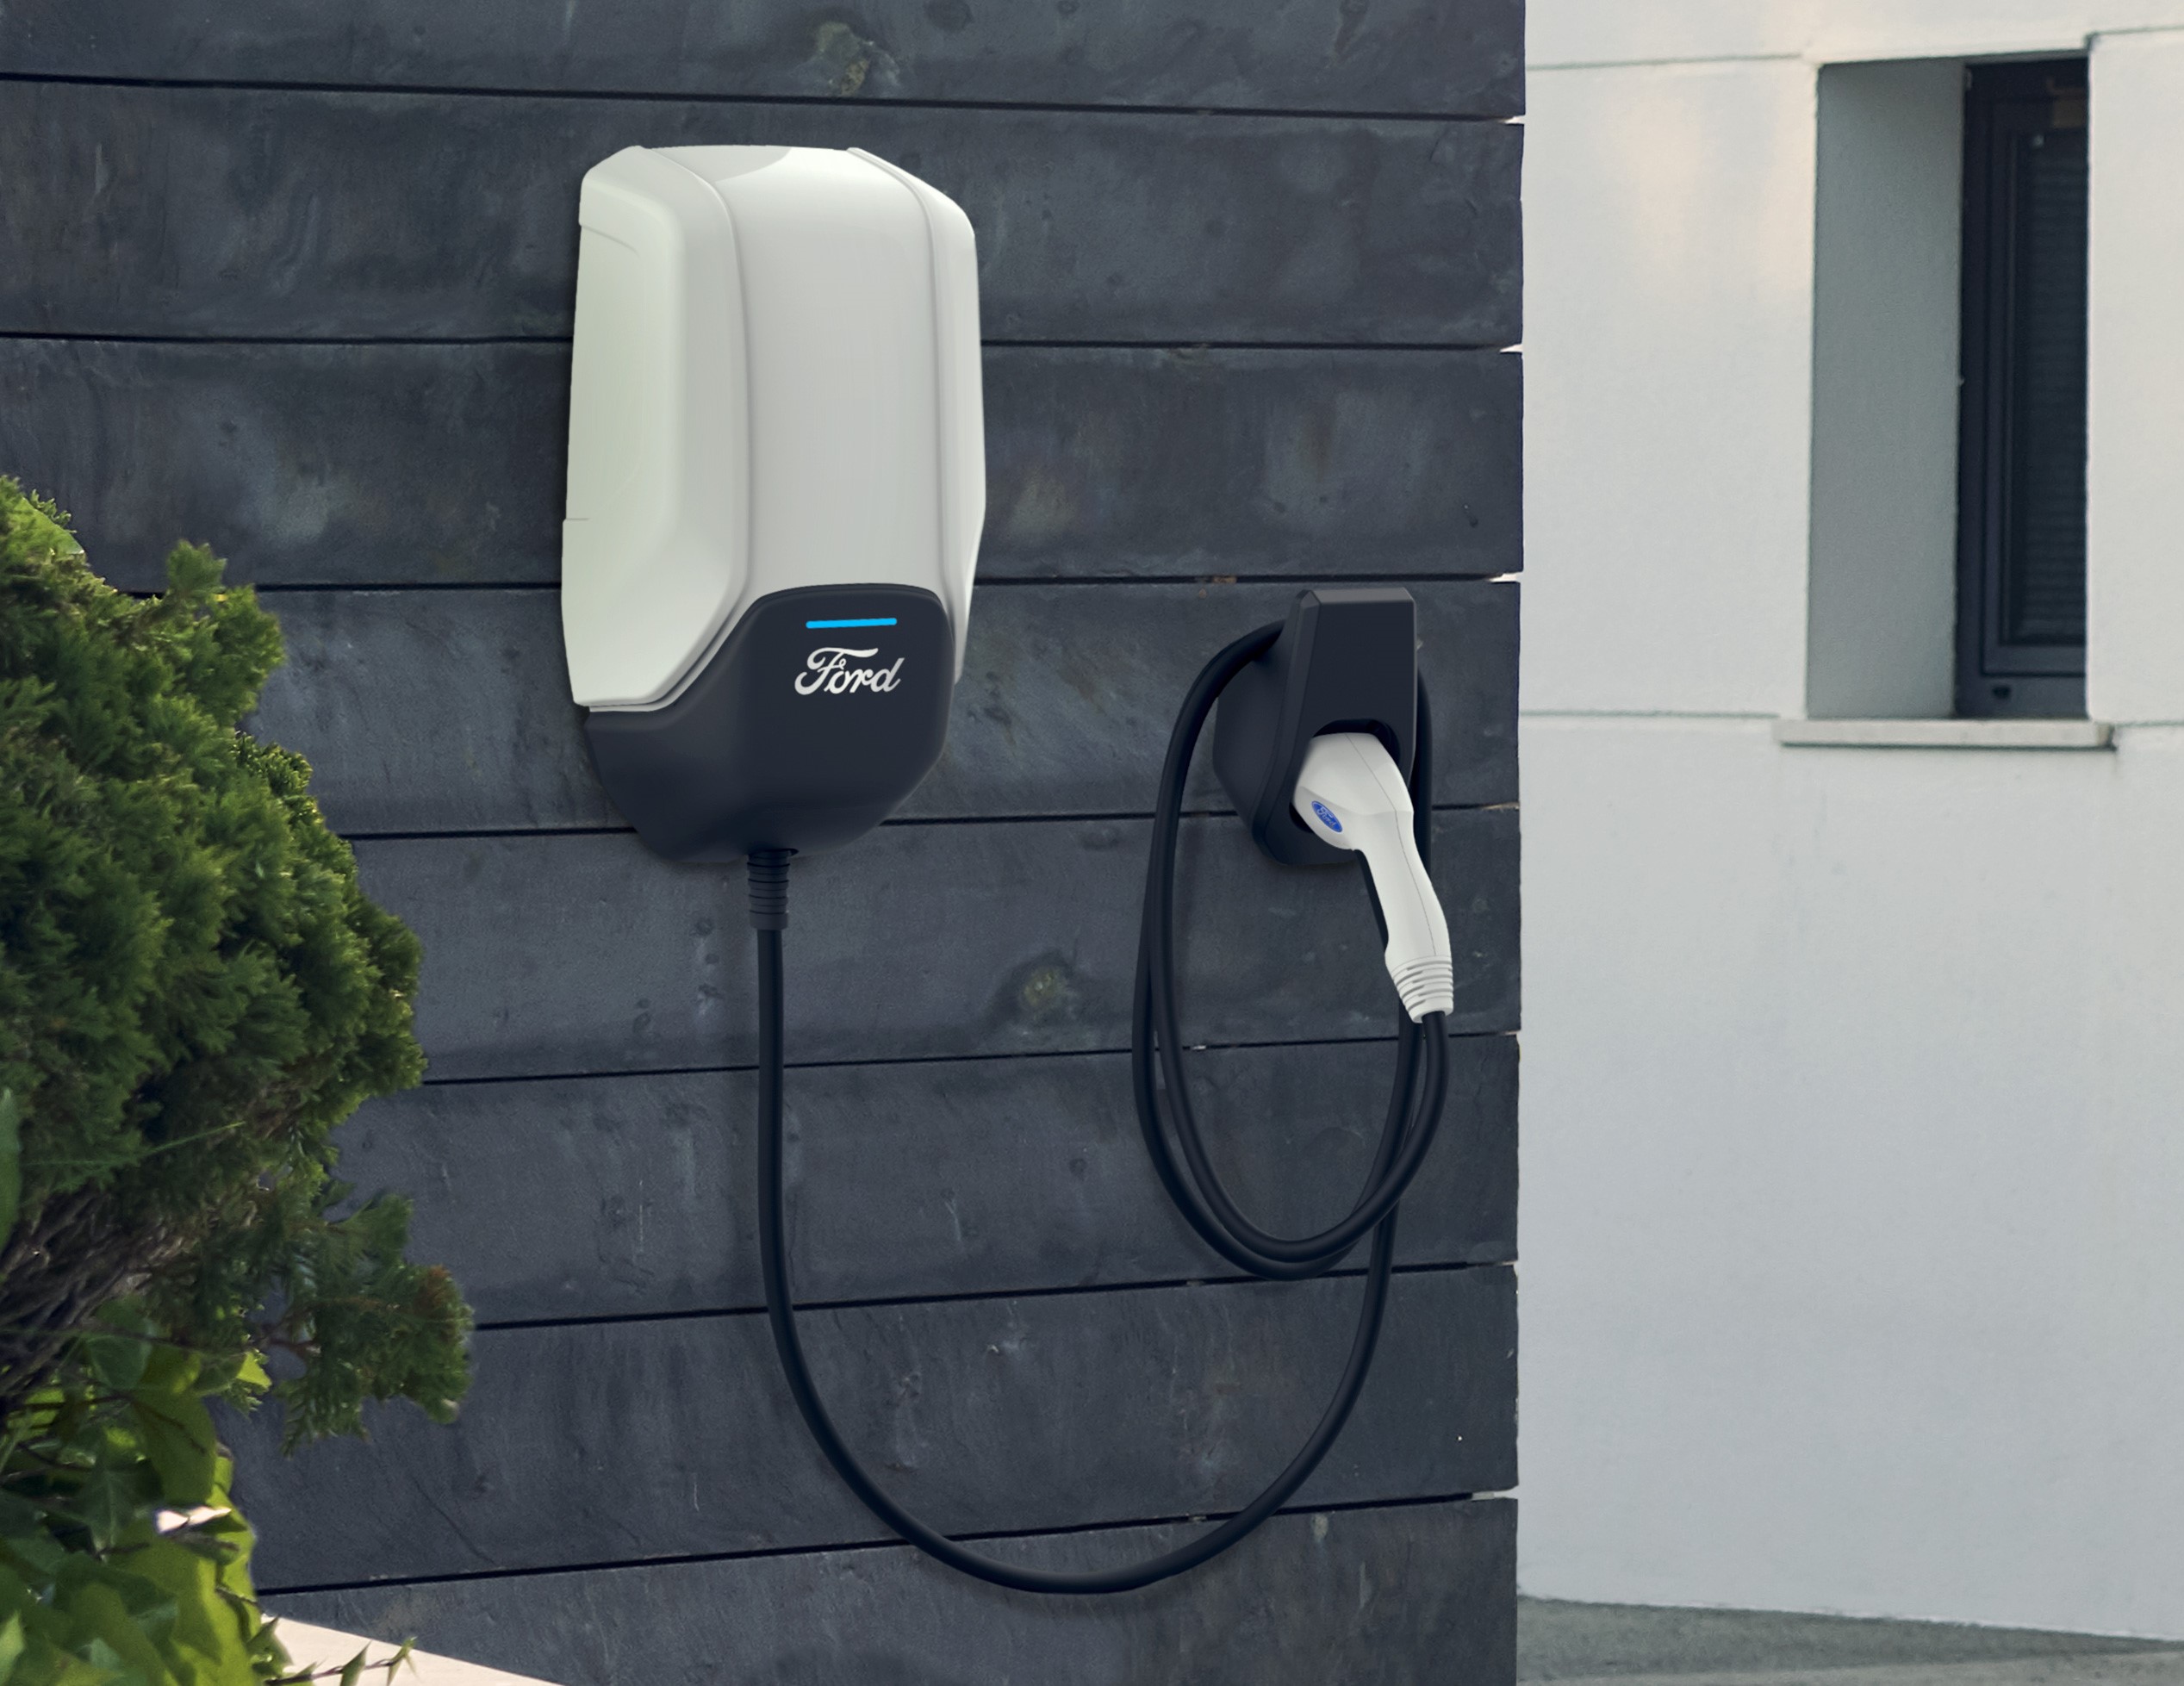 Ford announces plans for EV charging, partners with Amazon and